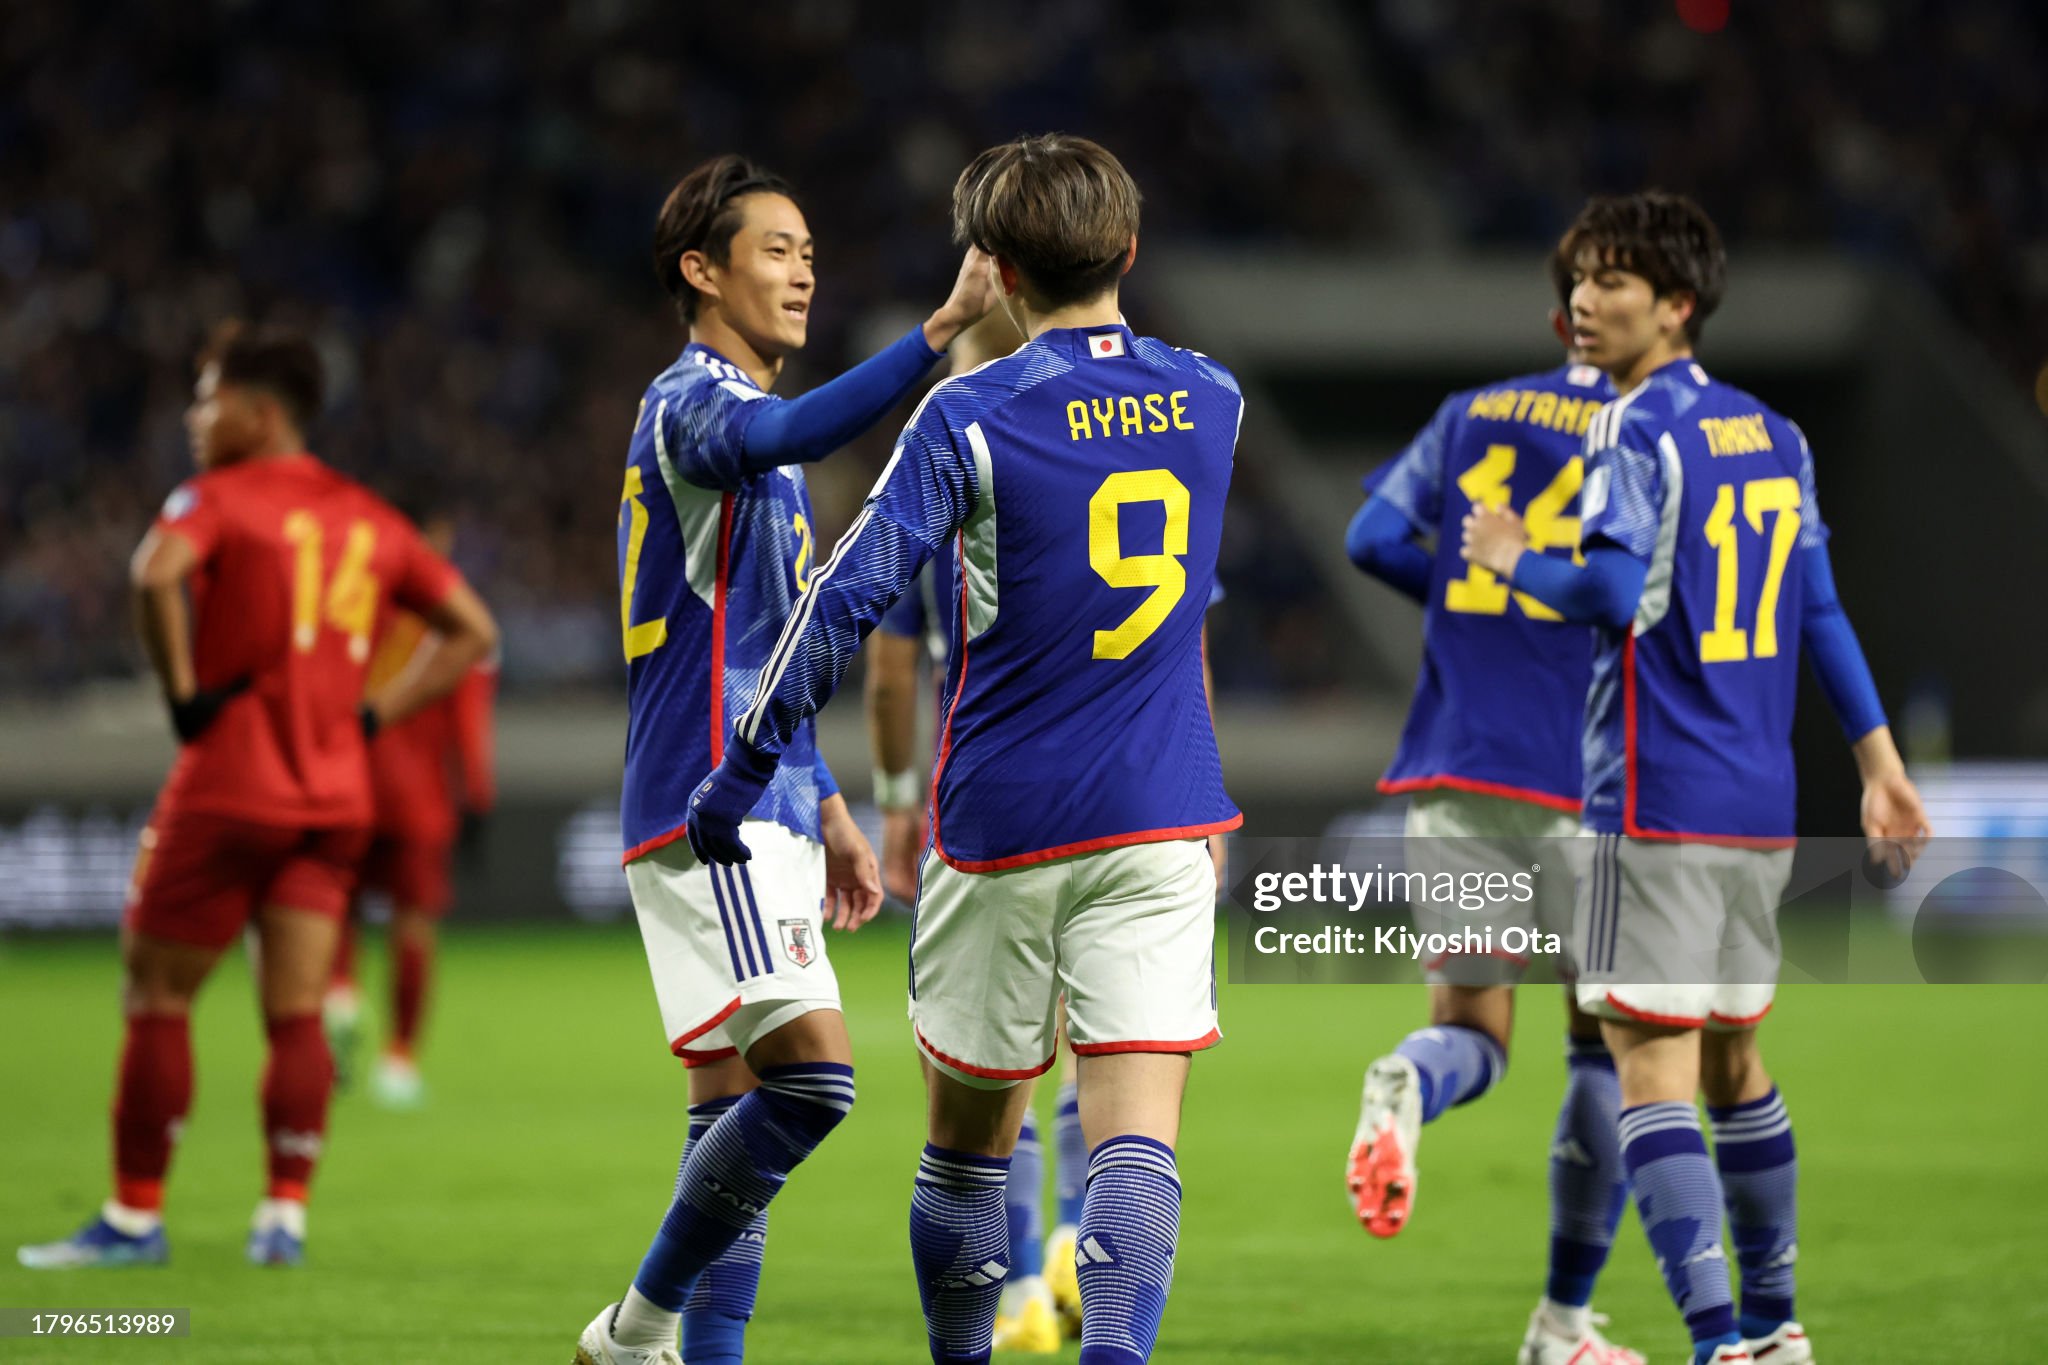 Feyenoord player Ueda shares emotional story after hat-trick for Japan